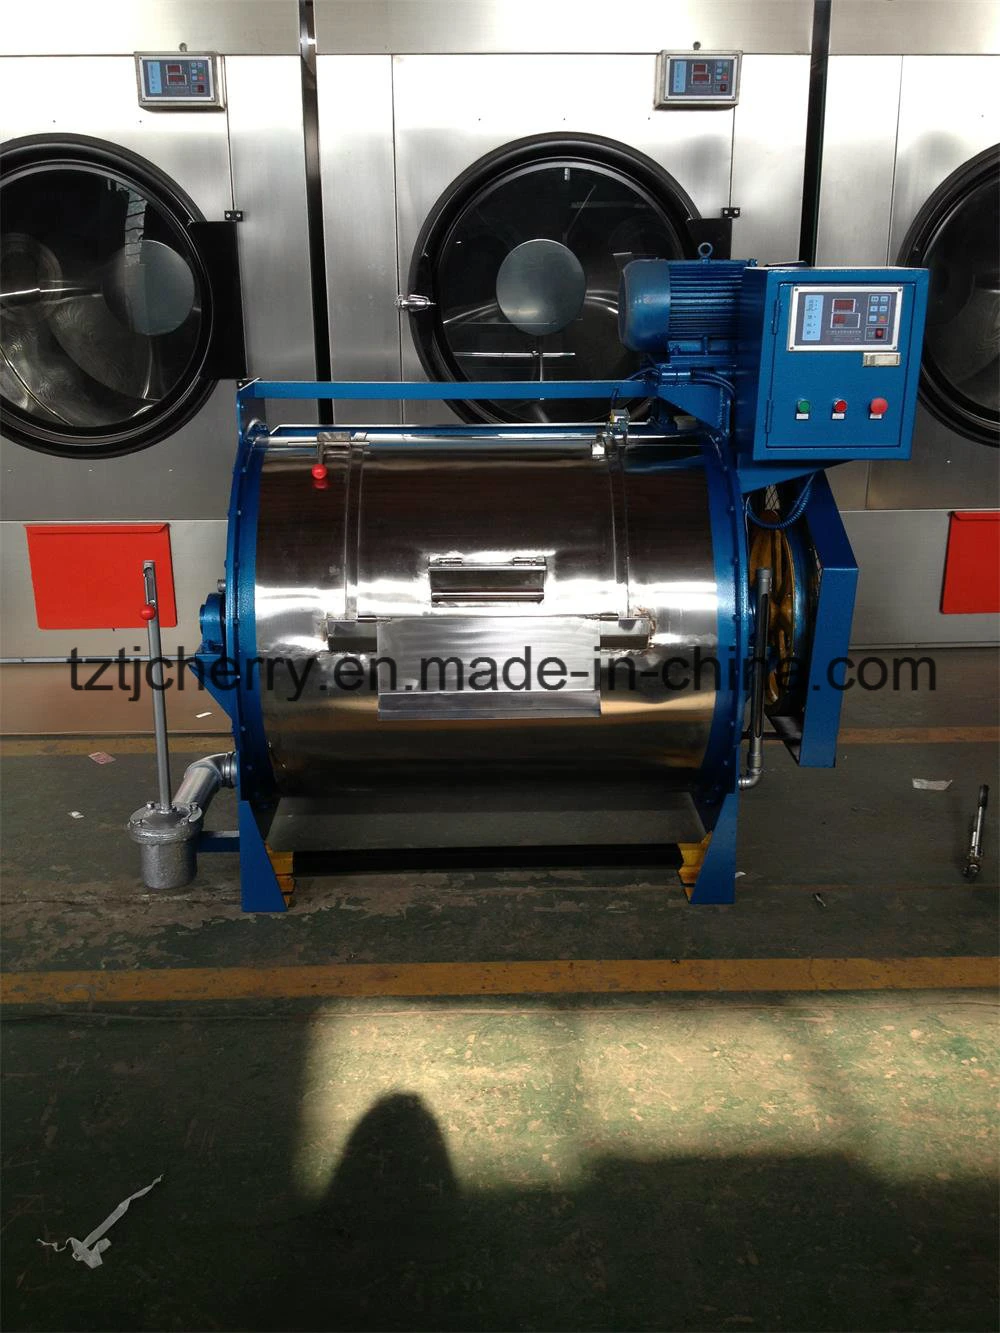 Clothes Commercial Washing Machine Sample Washing Machine 15kg to 70kg CE Approved & SGS Audited